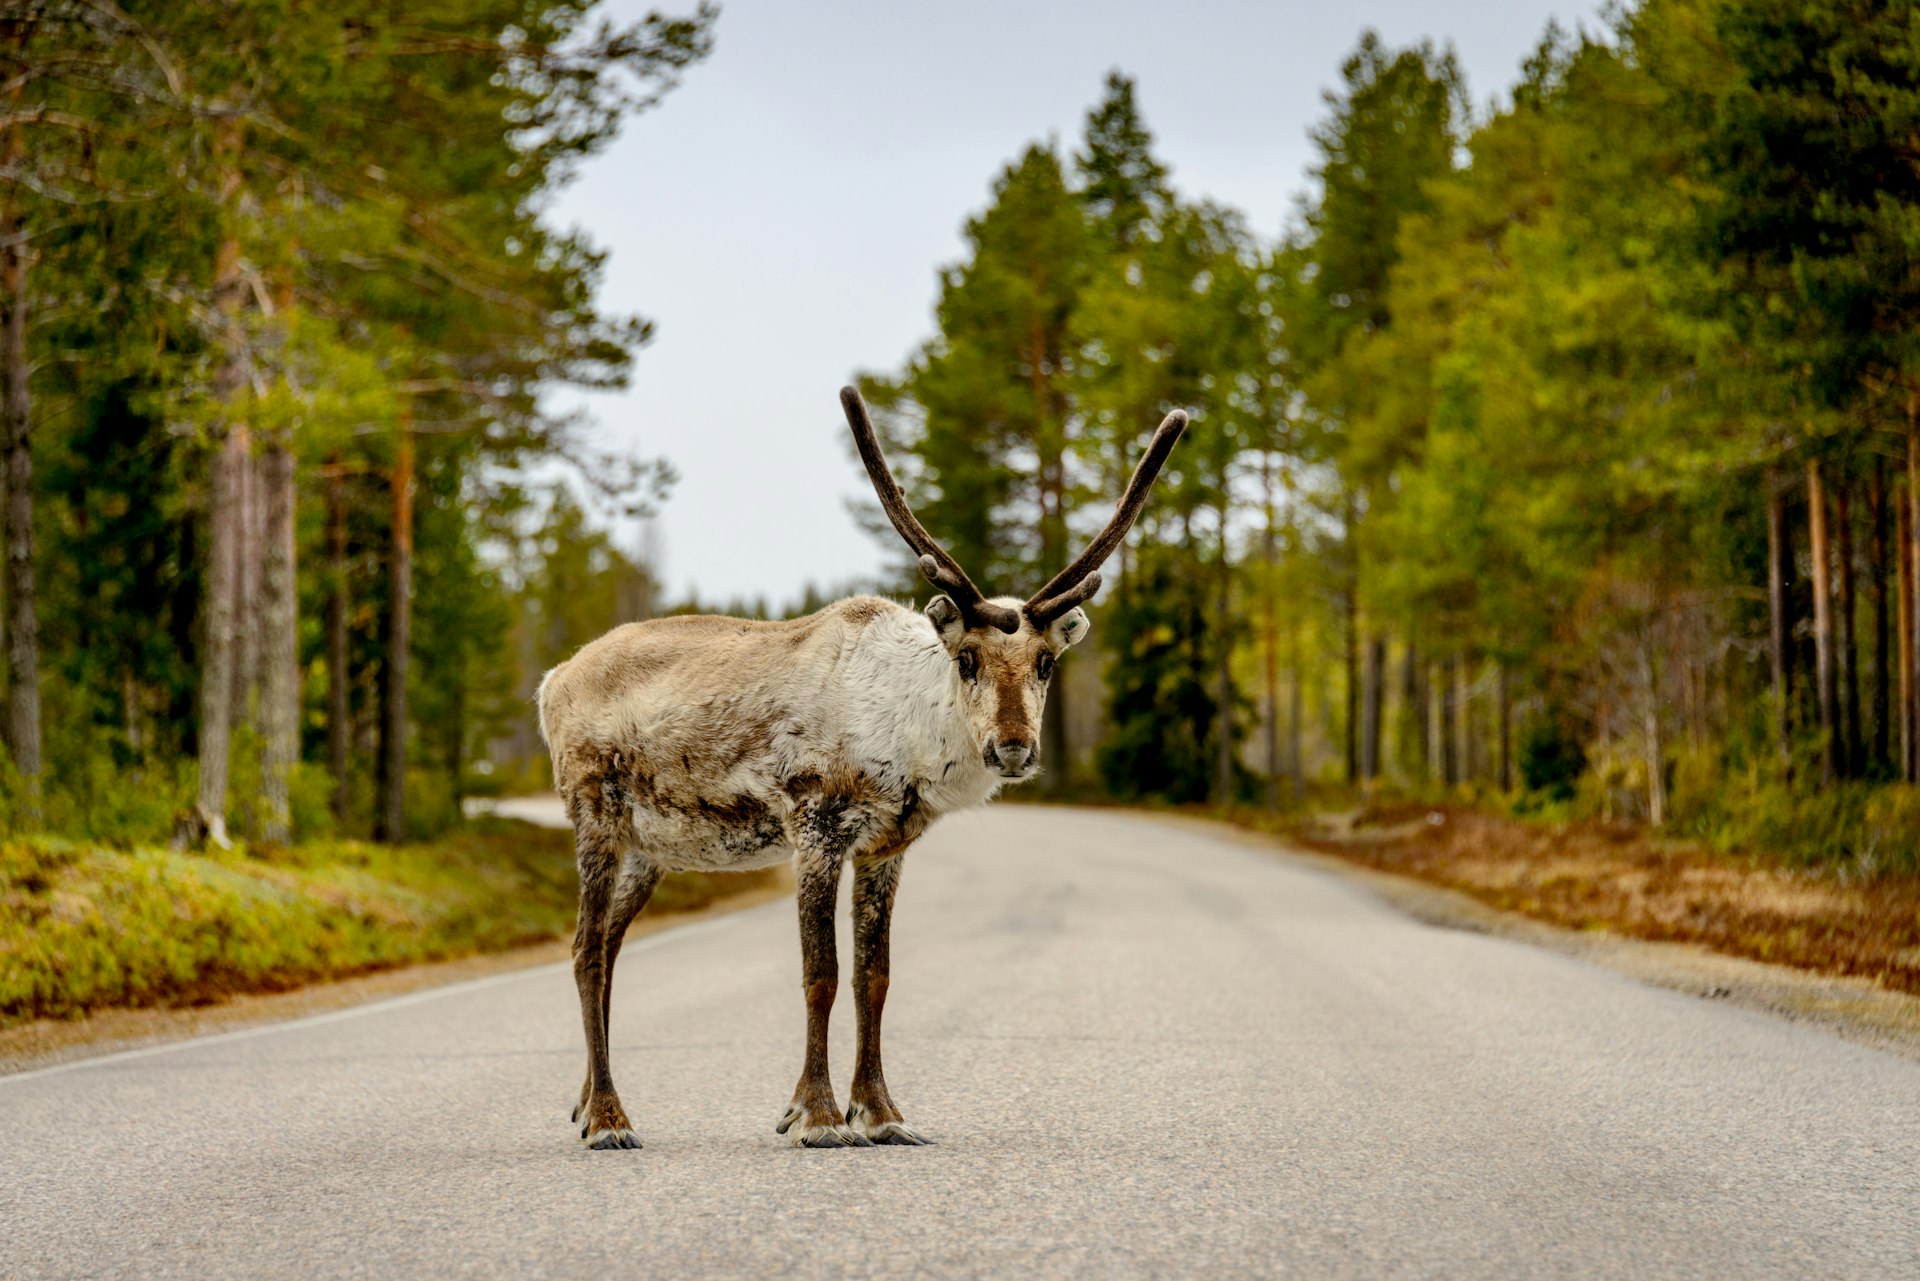 A reindeer in the middle of a road in Lapland, Finland